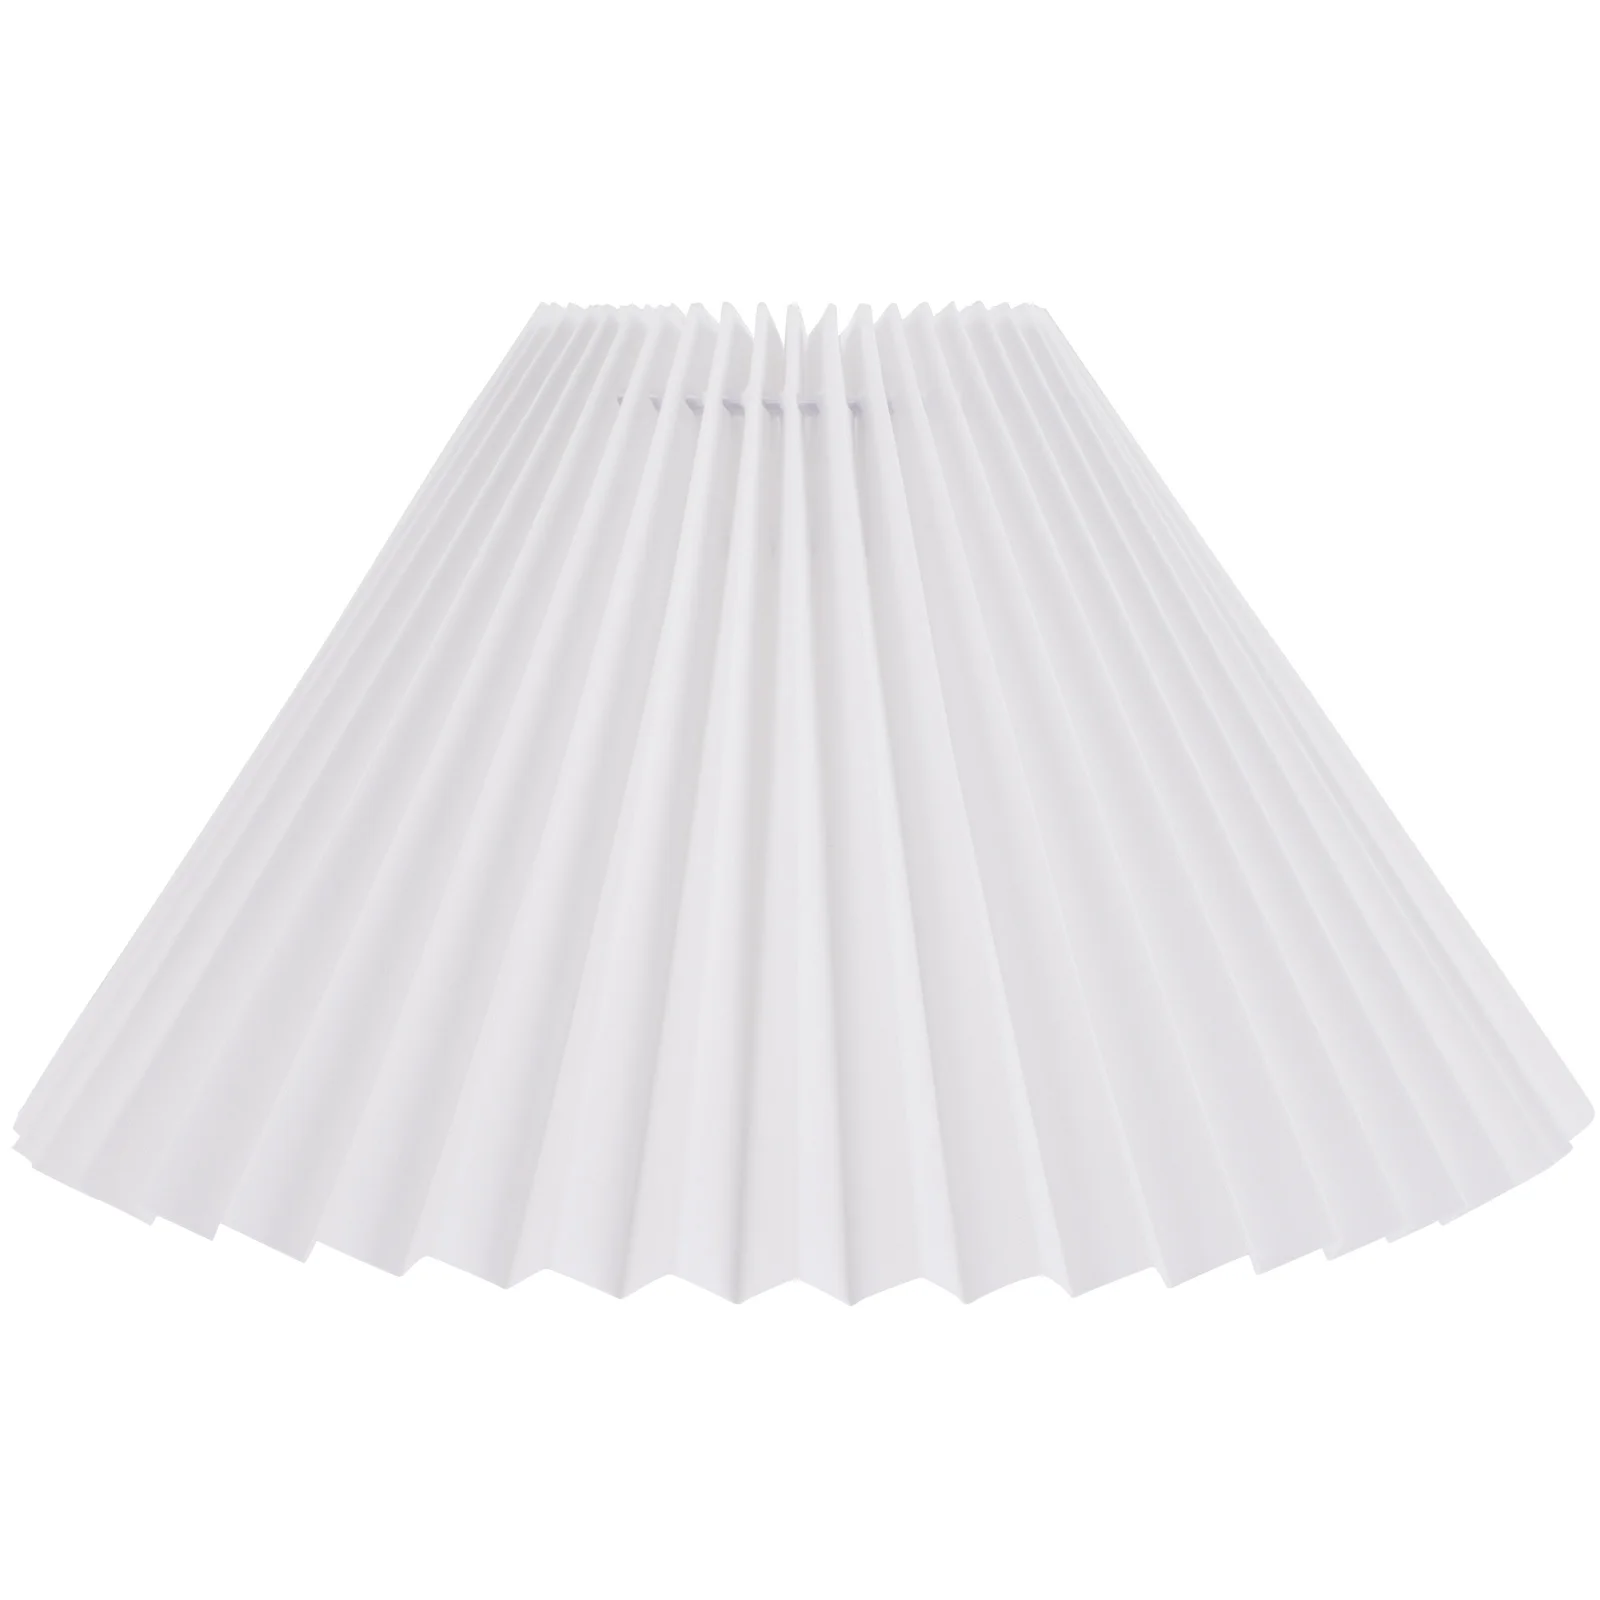 

Lamp Shade Light Table Cover Pleated Fabric Replacement Shades Chandelier Protector Floor Clip Lampshade Lamps Eggshell Desk